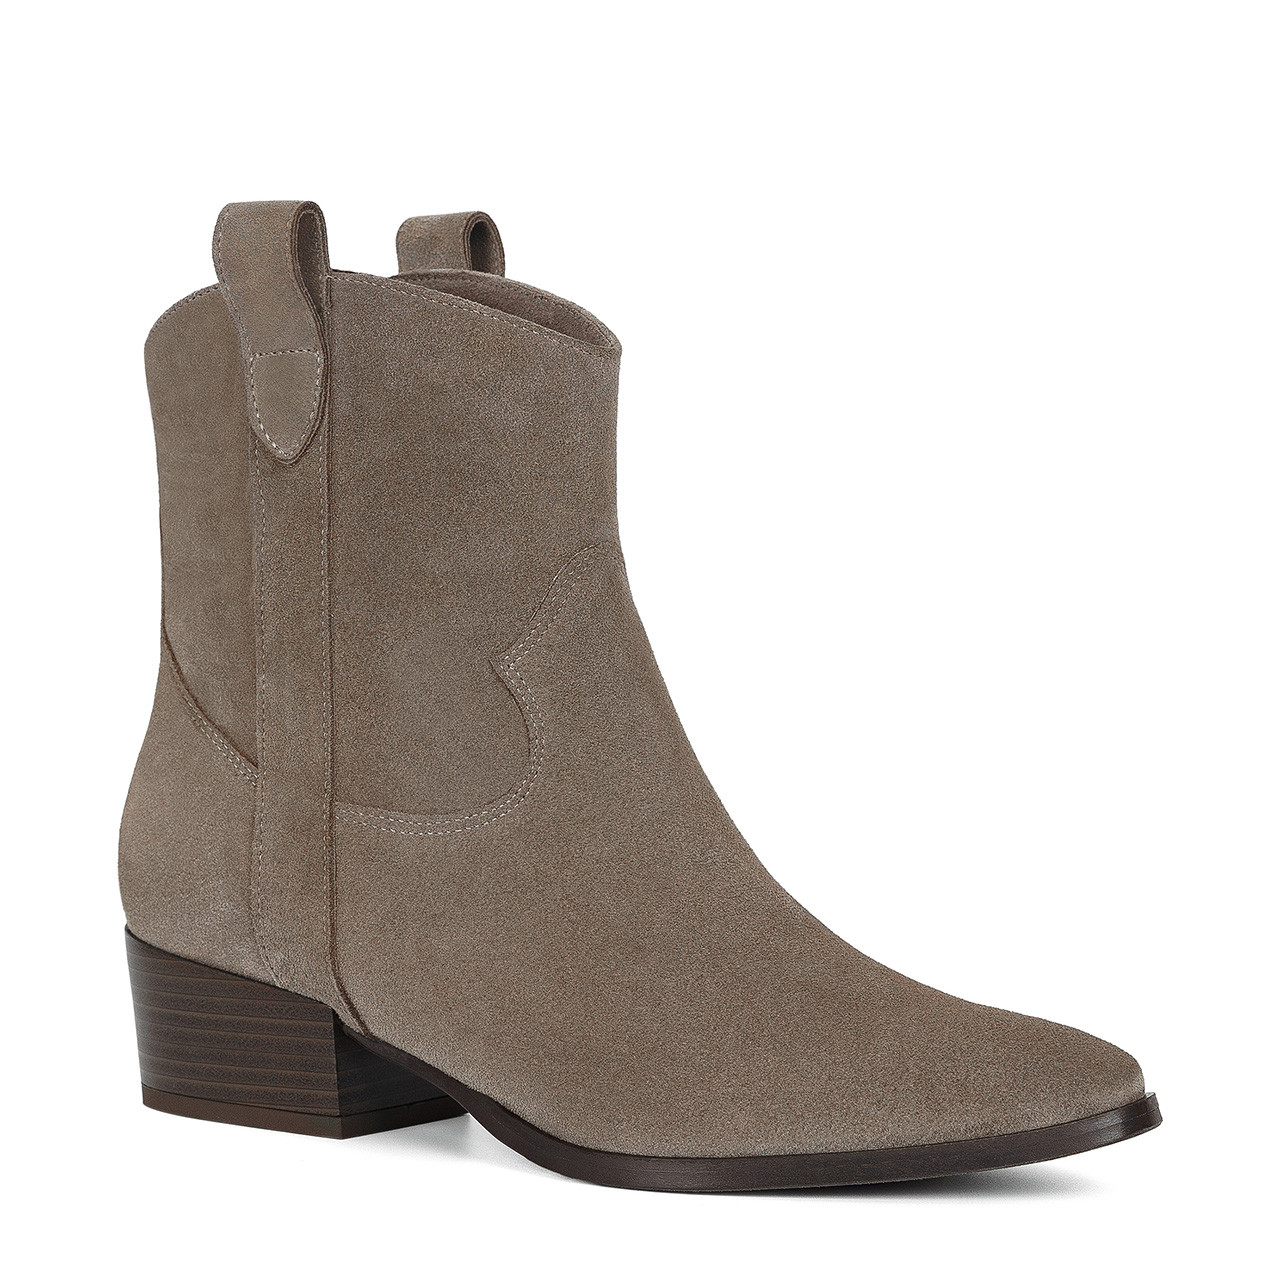 low heel ankle boots | Nordstrom